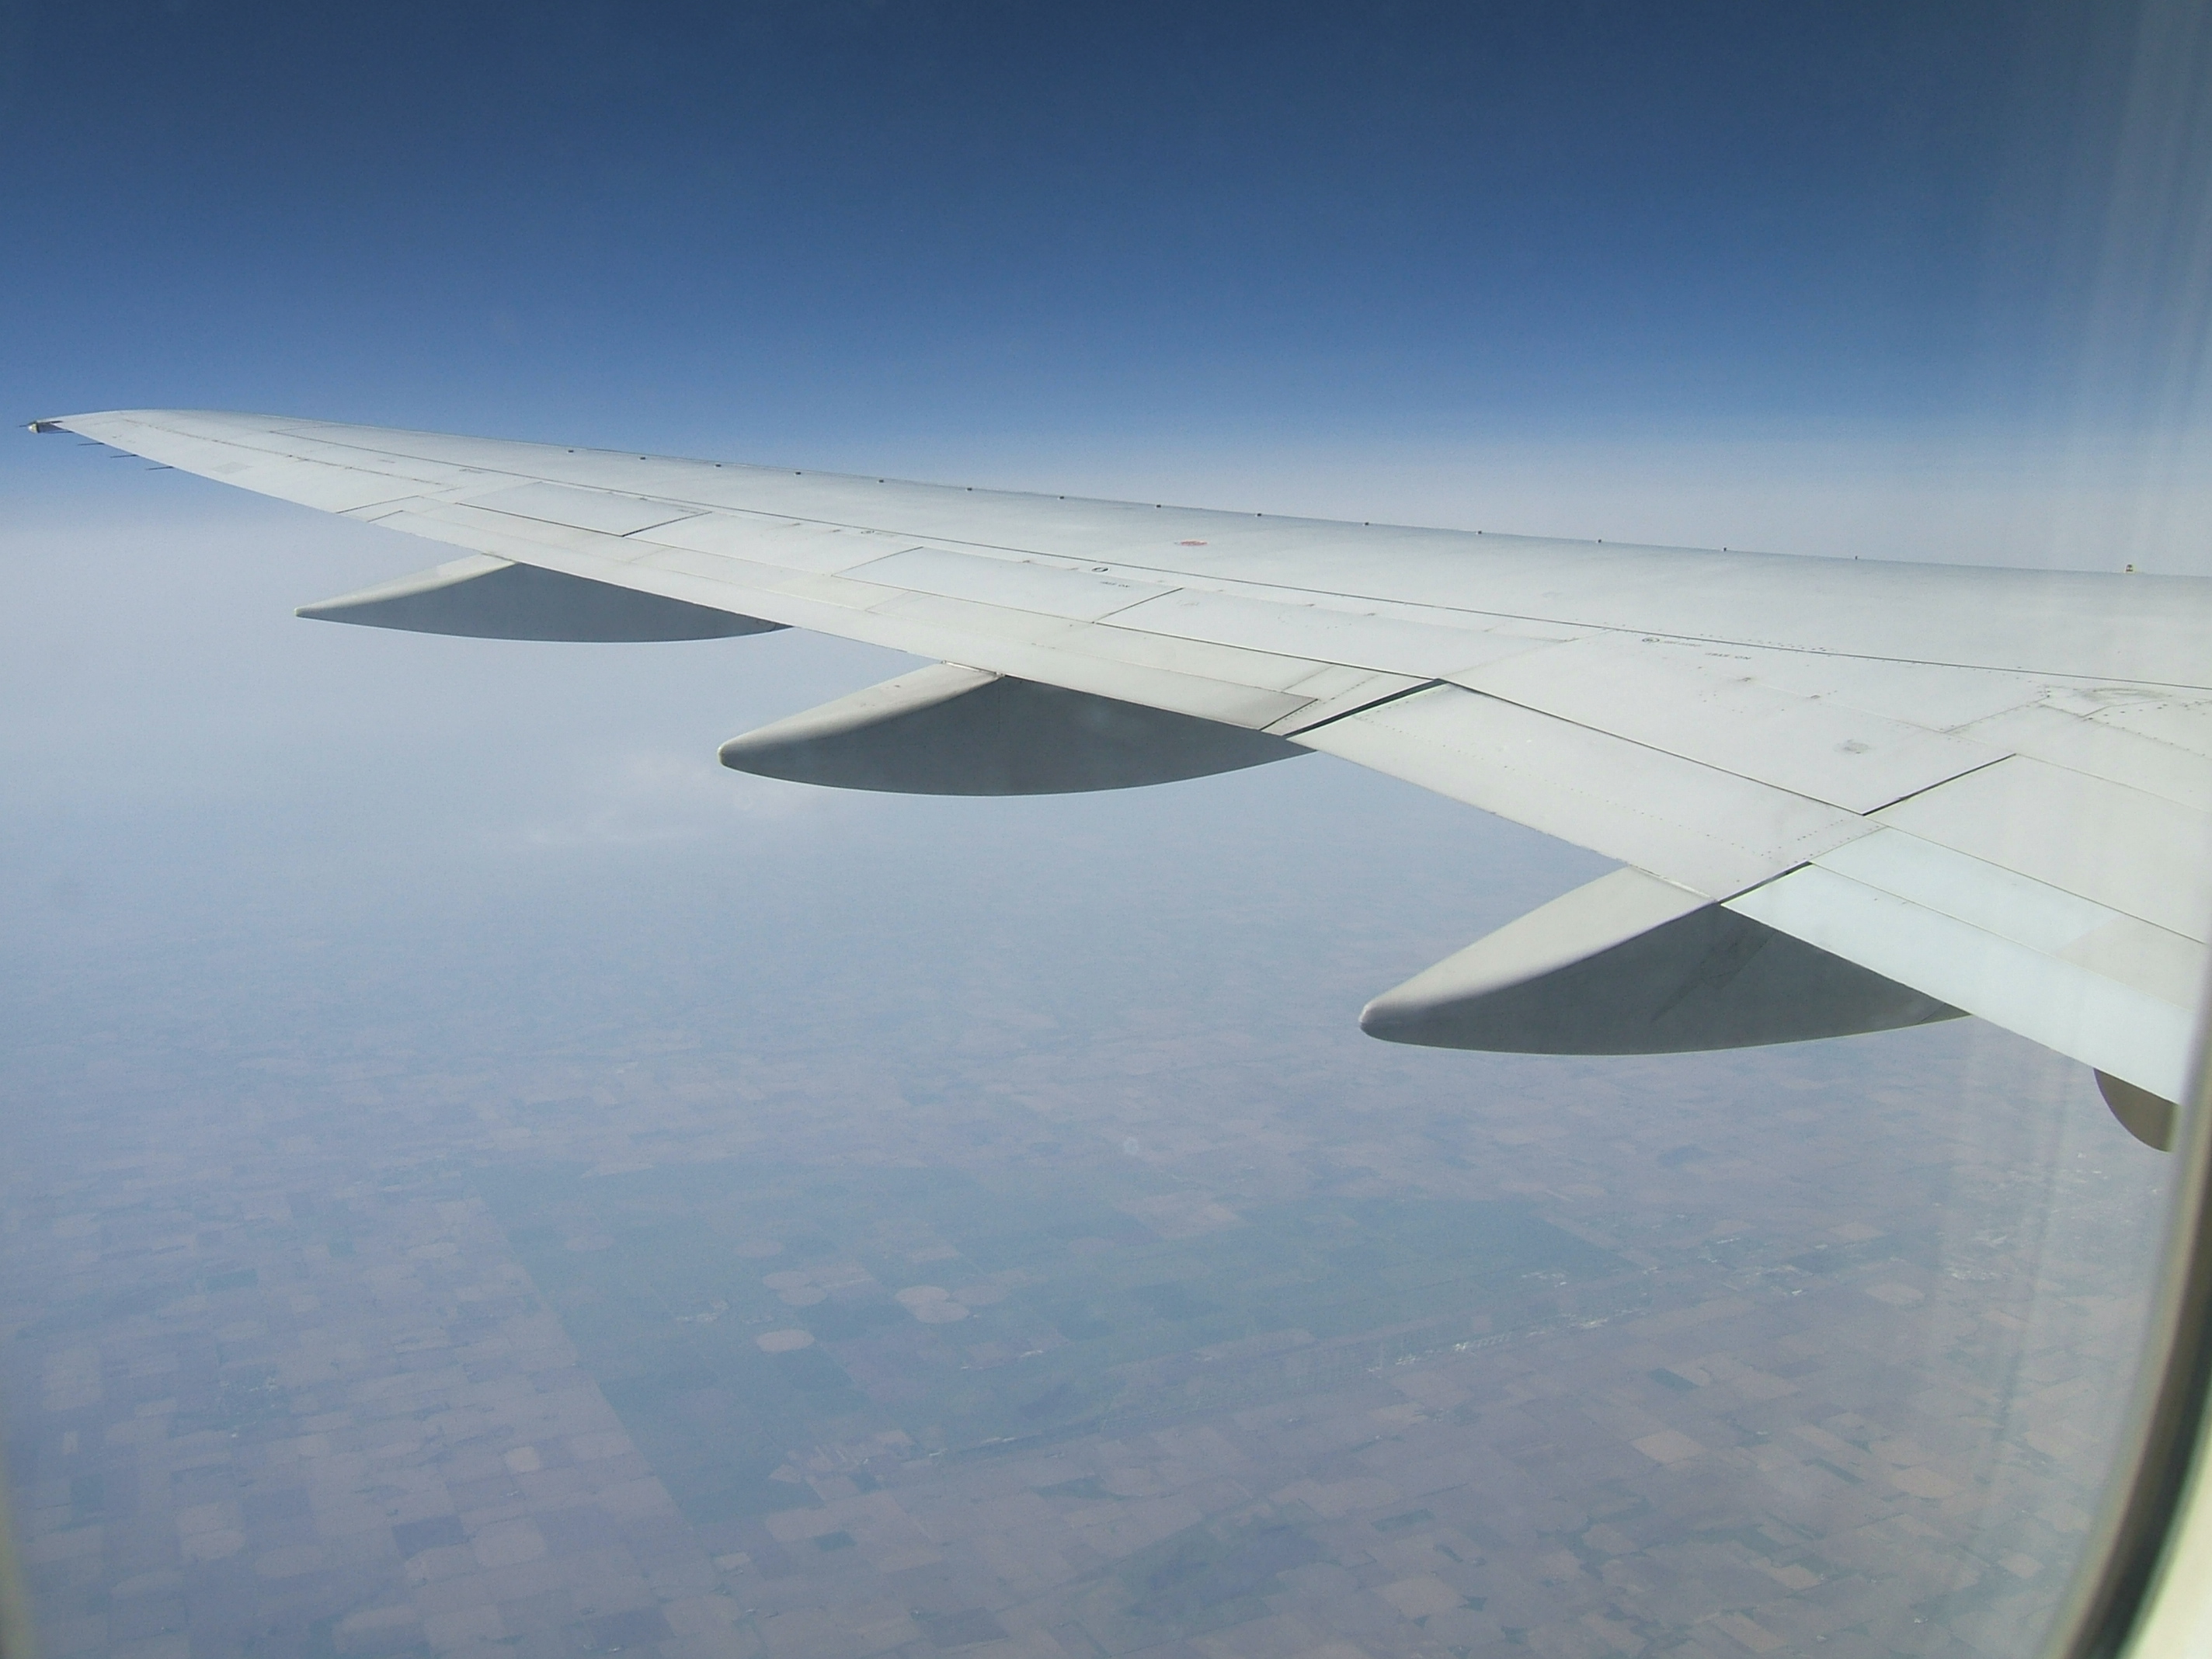 The wing of the plane